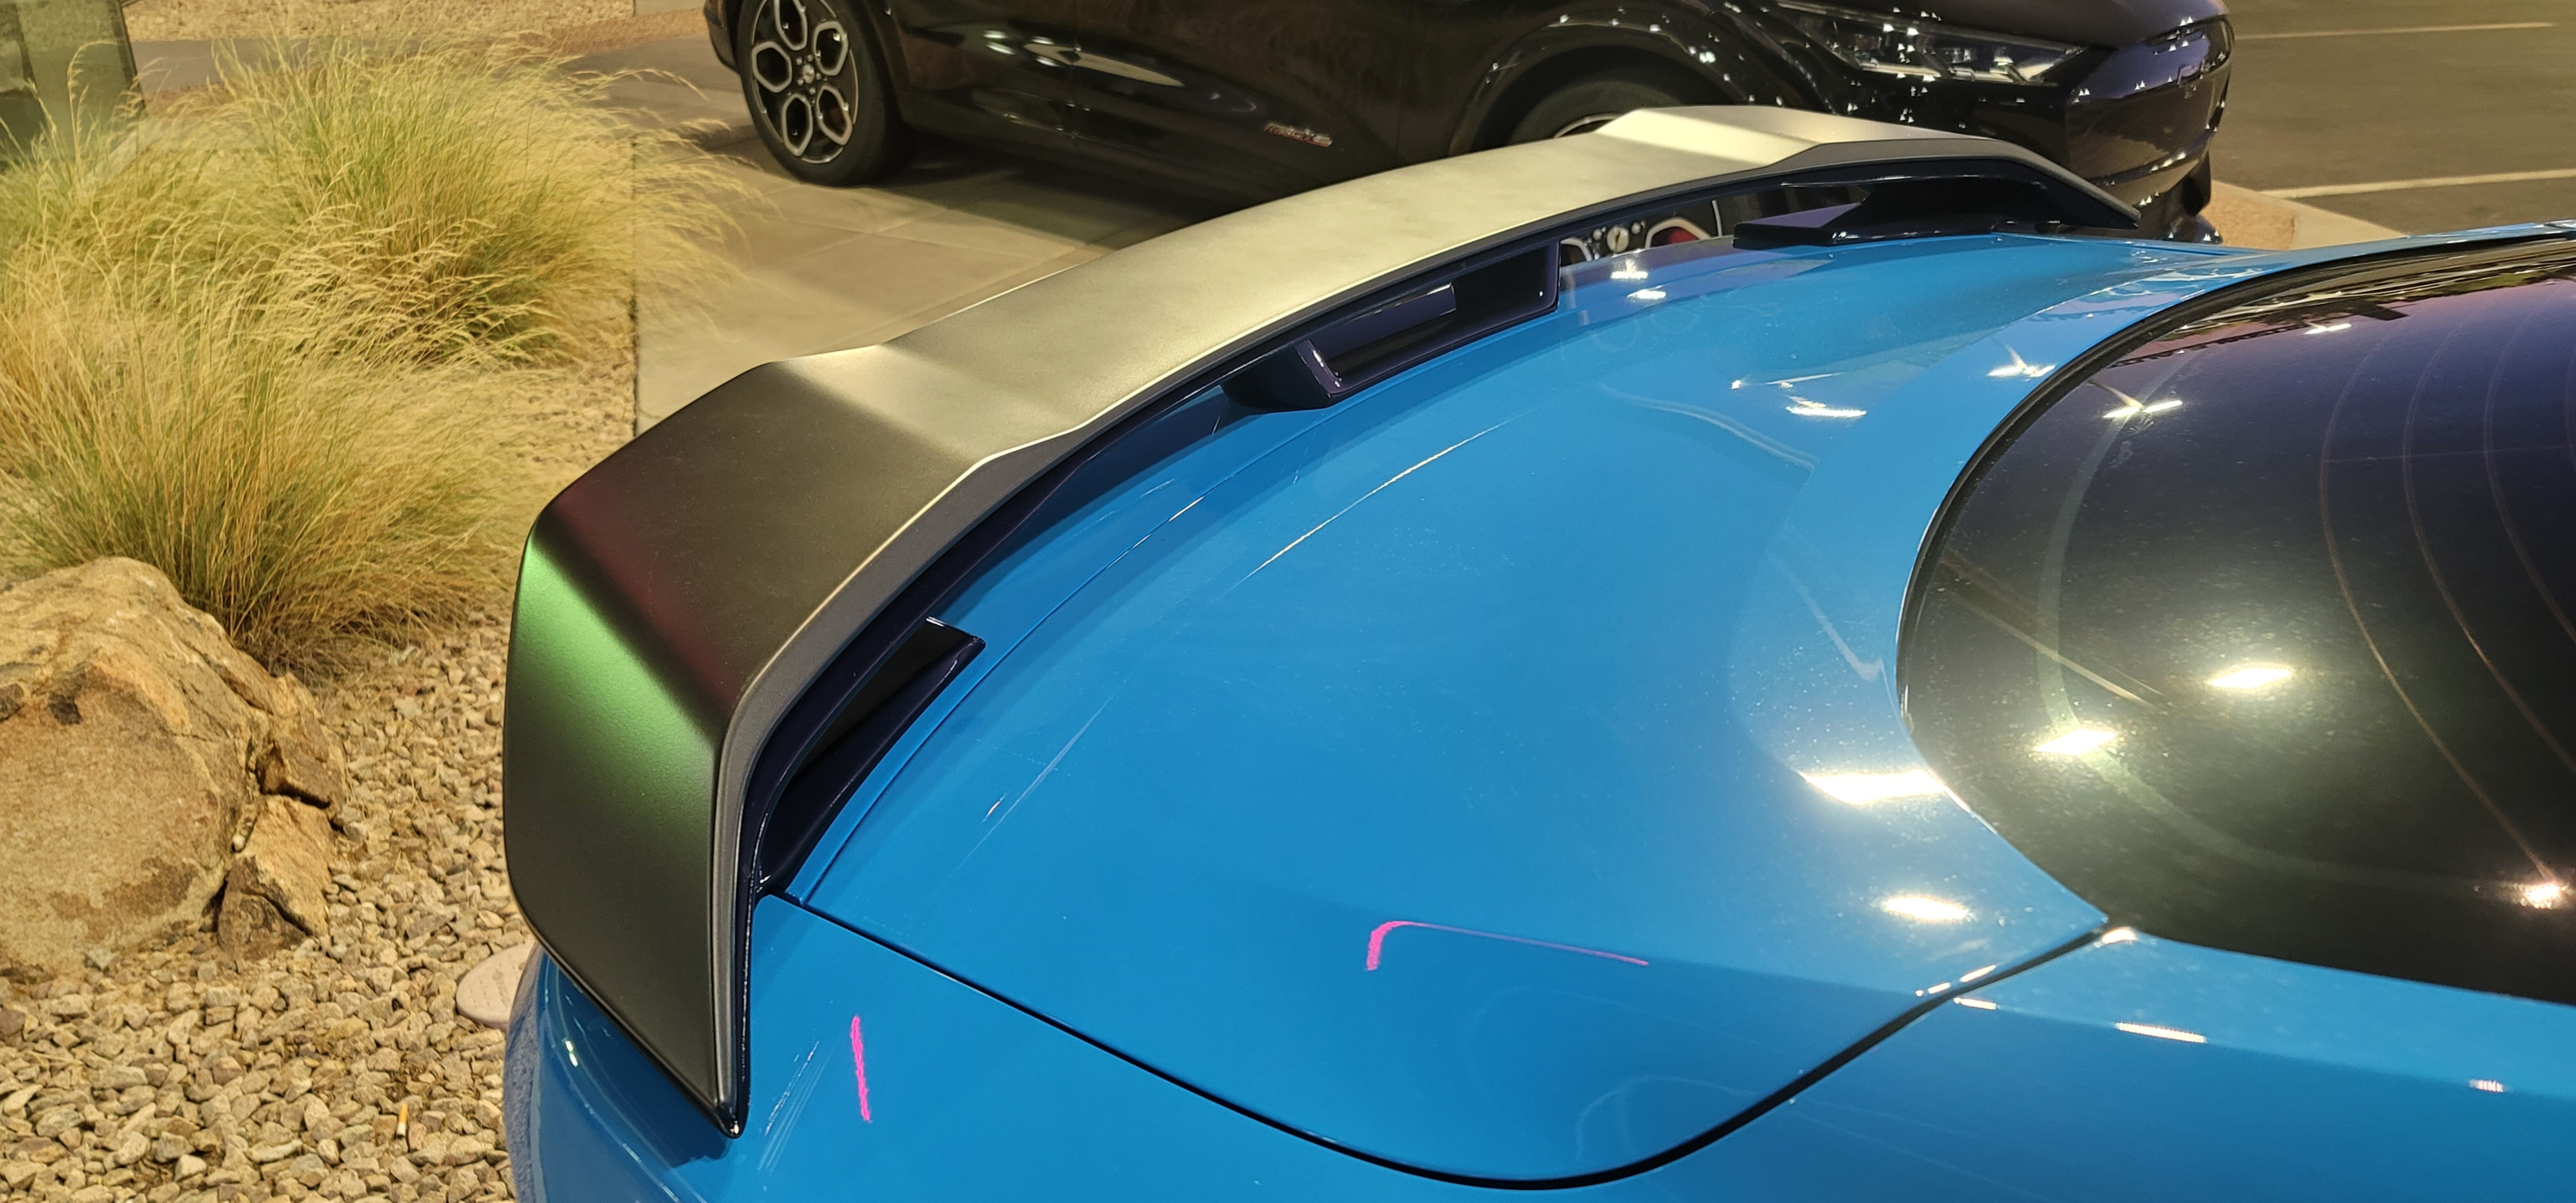 S650 Mustang Is the Dark Horse base spoiler the same as the HP spoiler? 1695733402677